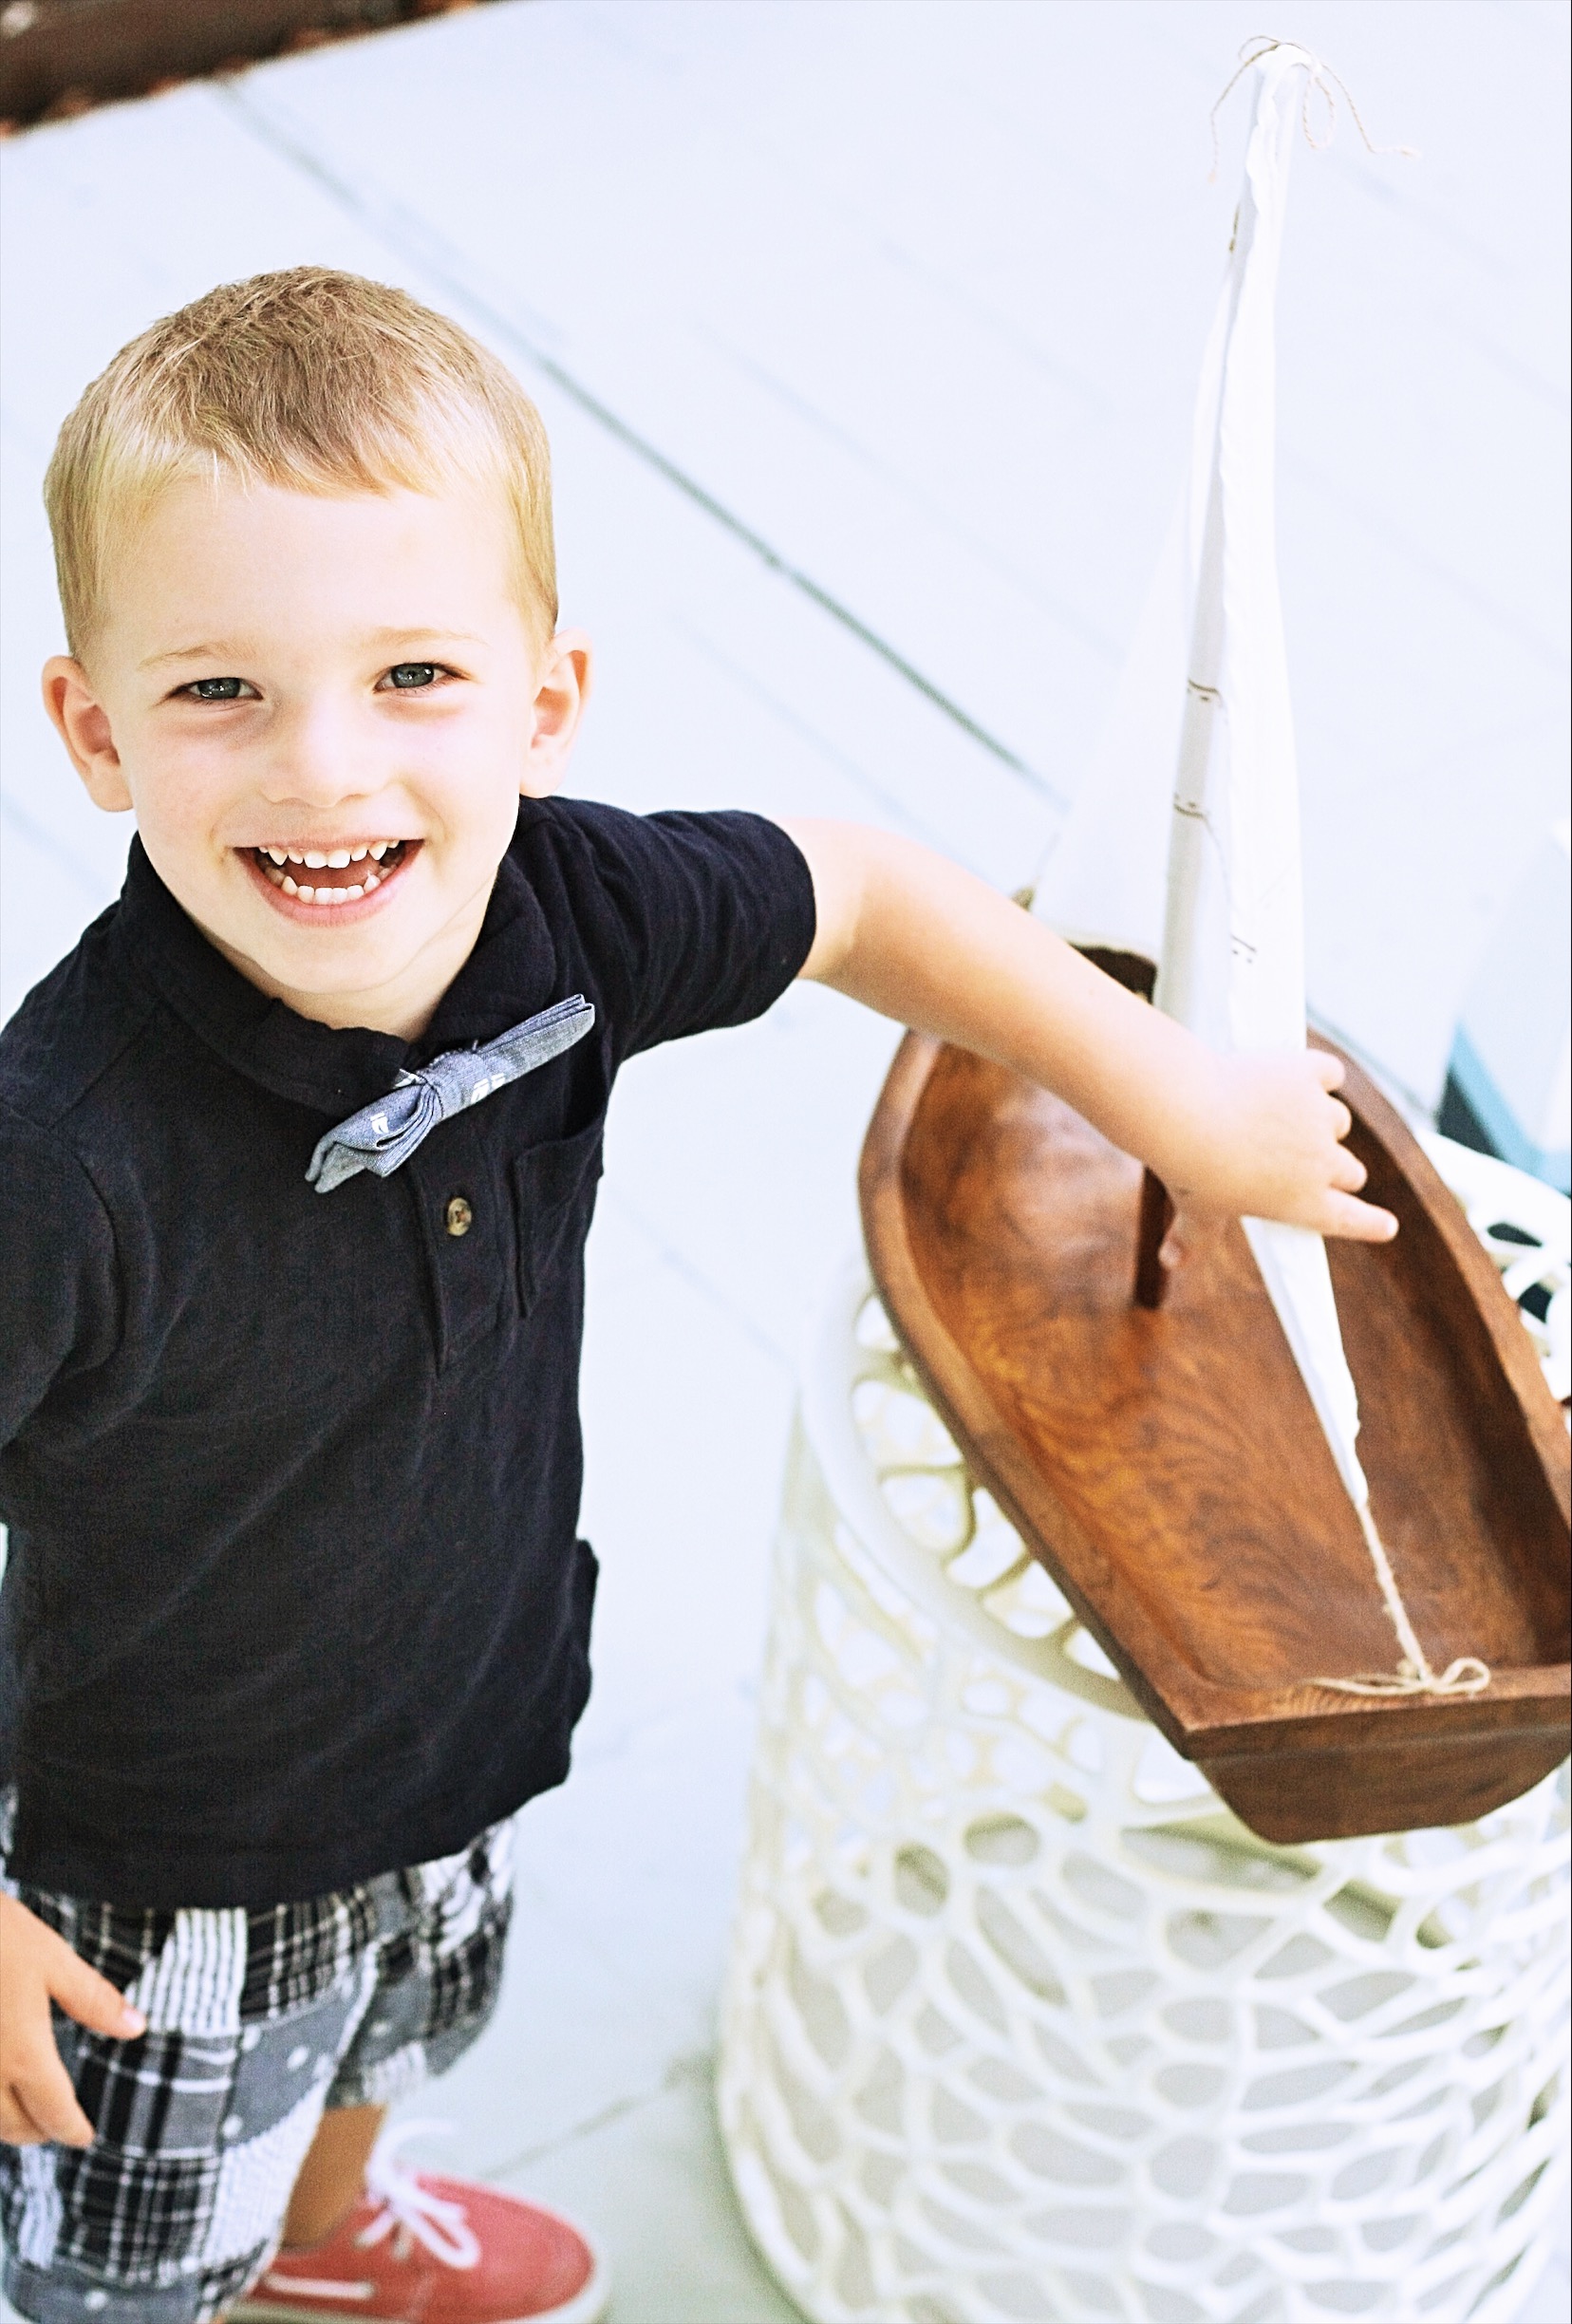 Nebraska Motherhood + Fashion blogger, Leslie of Tiny Stampede shares little boys nautical styles on sale from Ralph Lauren, Janie and Jack and more | Browse this season's hottest colorful styles and patterns.